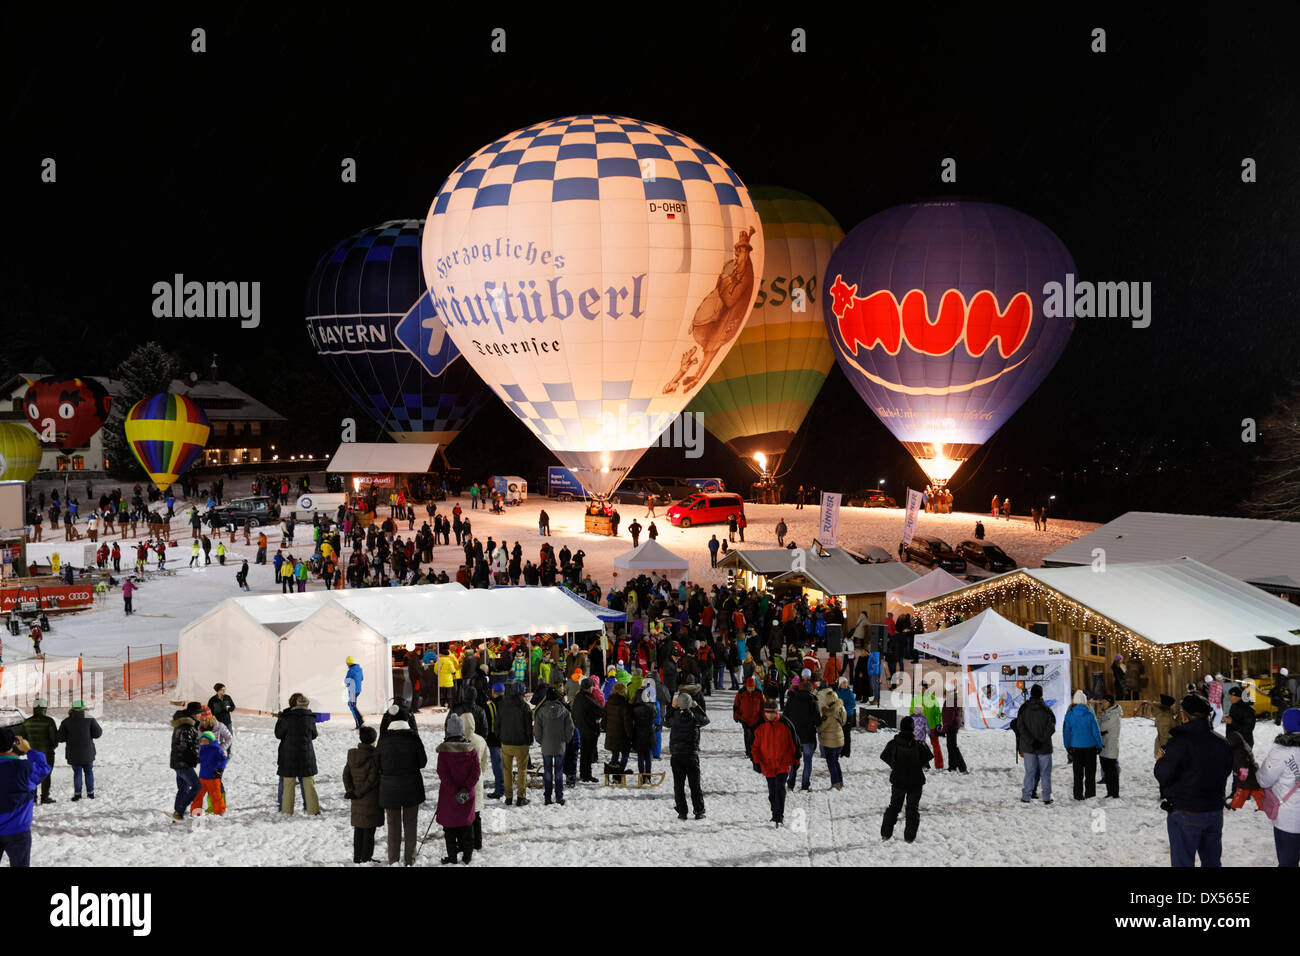 Balloon Glows High Resolution Stock Photography and Images - Alamy